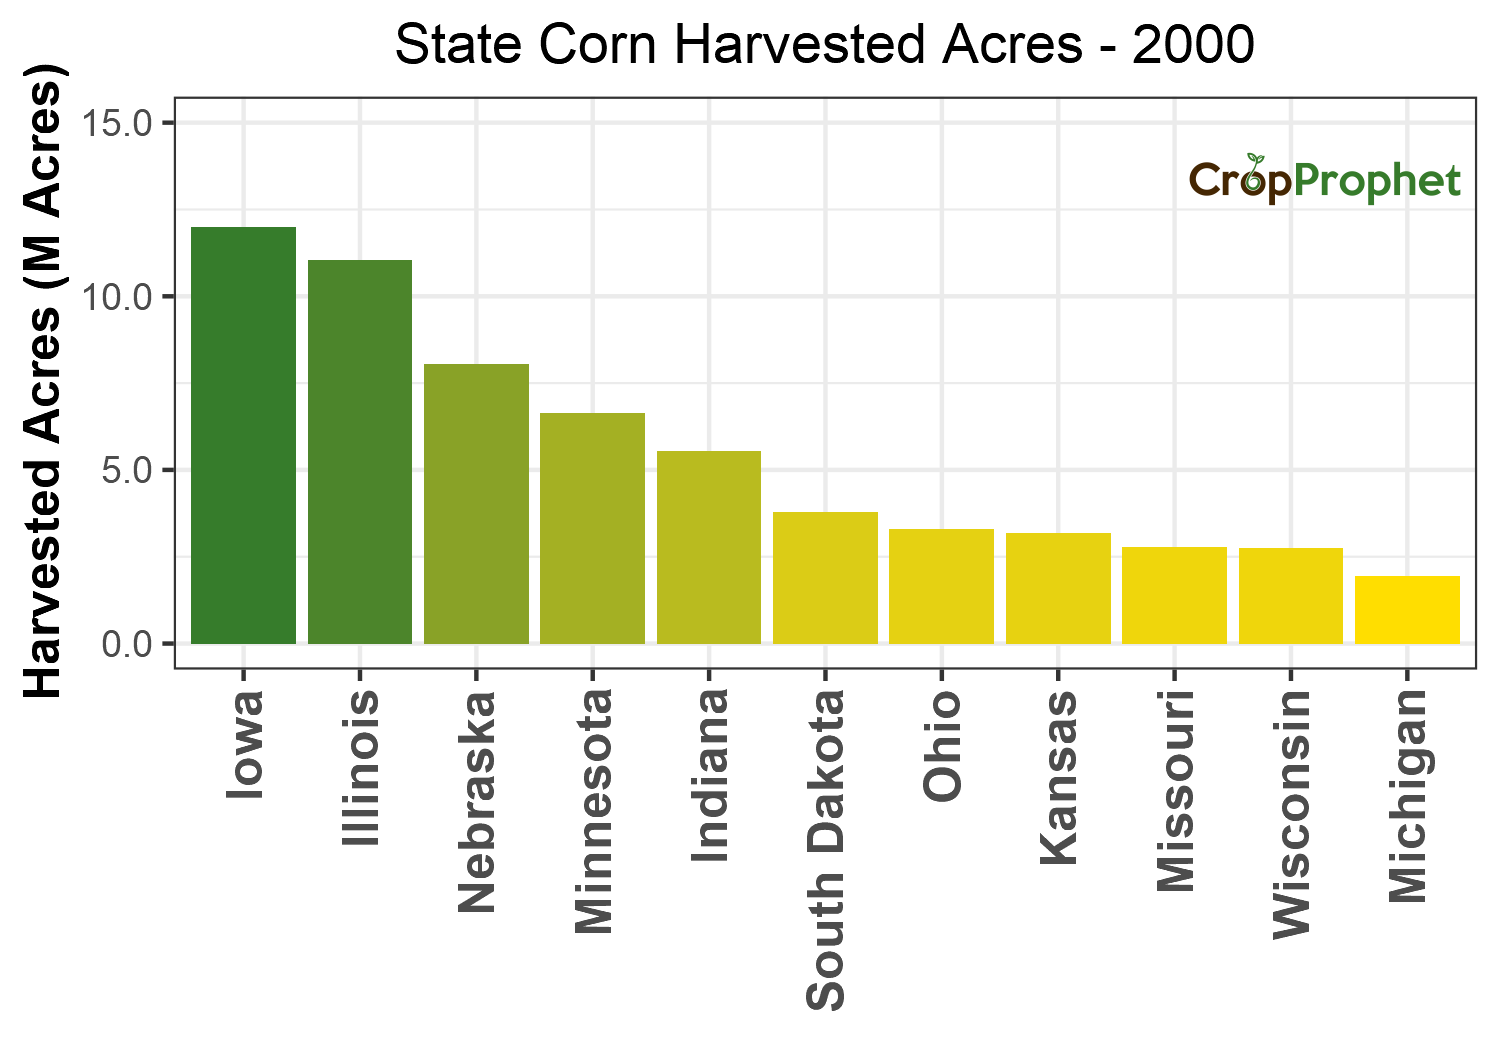 Corn Harvested Acres by State - 2000 Rankings